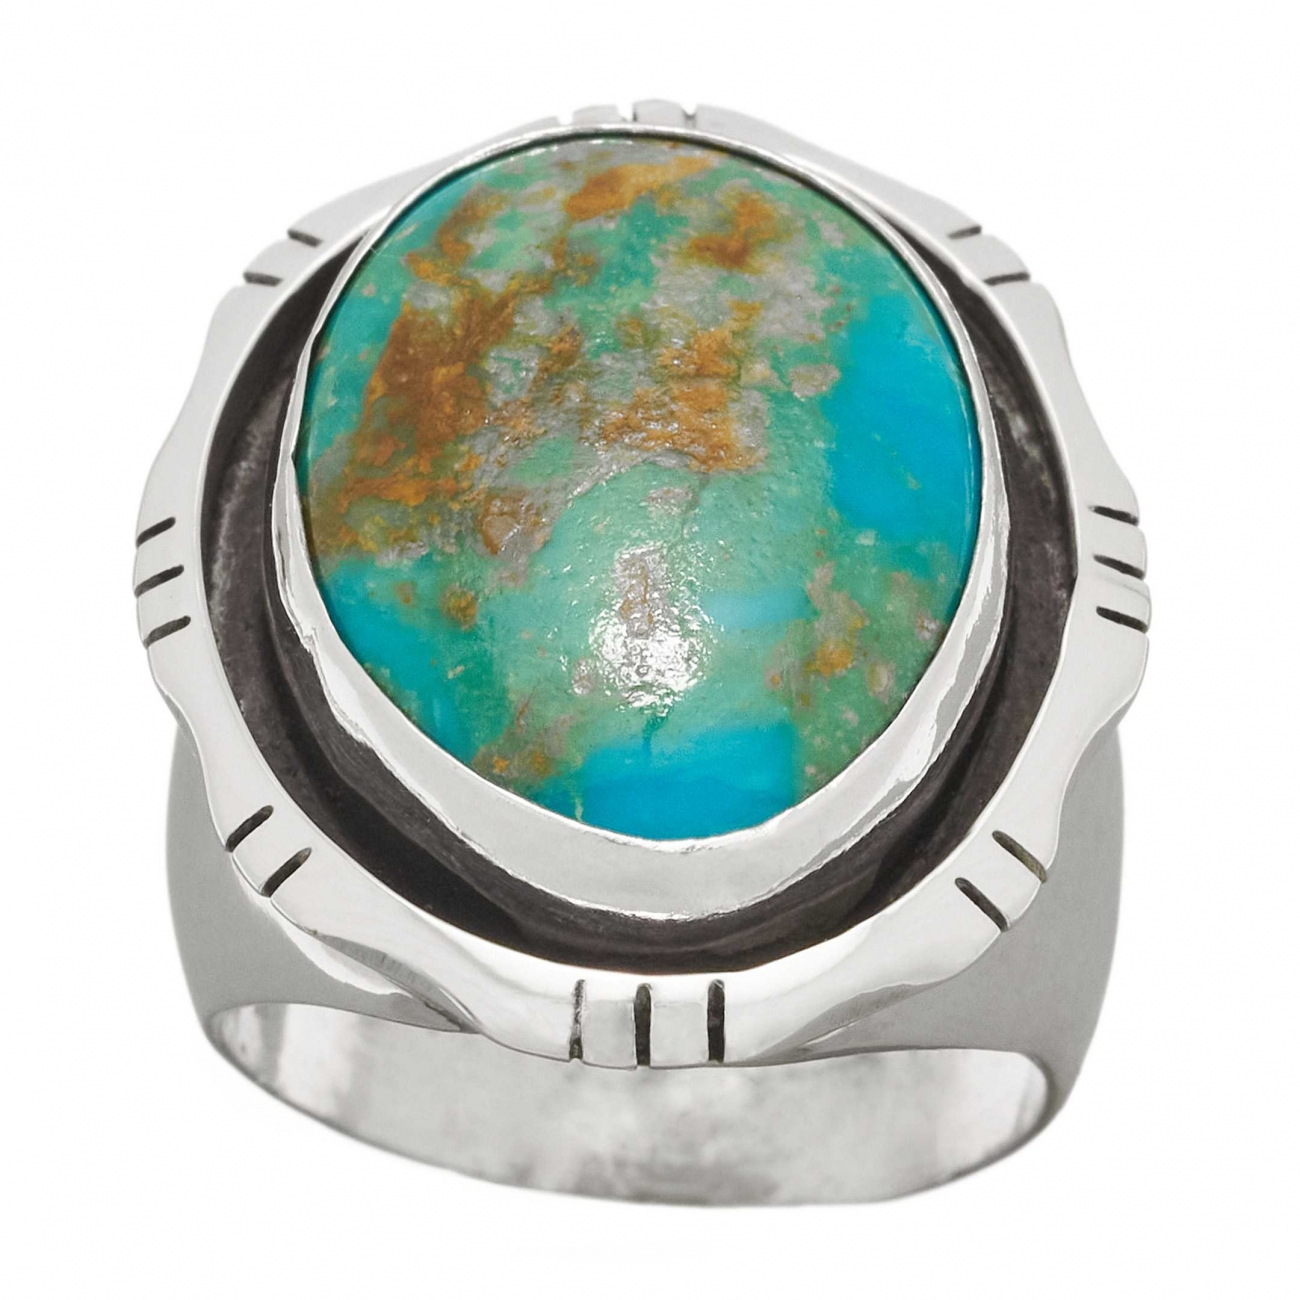 Navajo ring BA928 in turquoise and silver - Harpo Paris